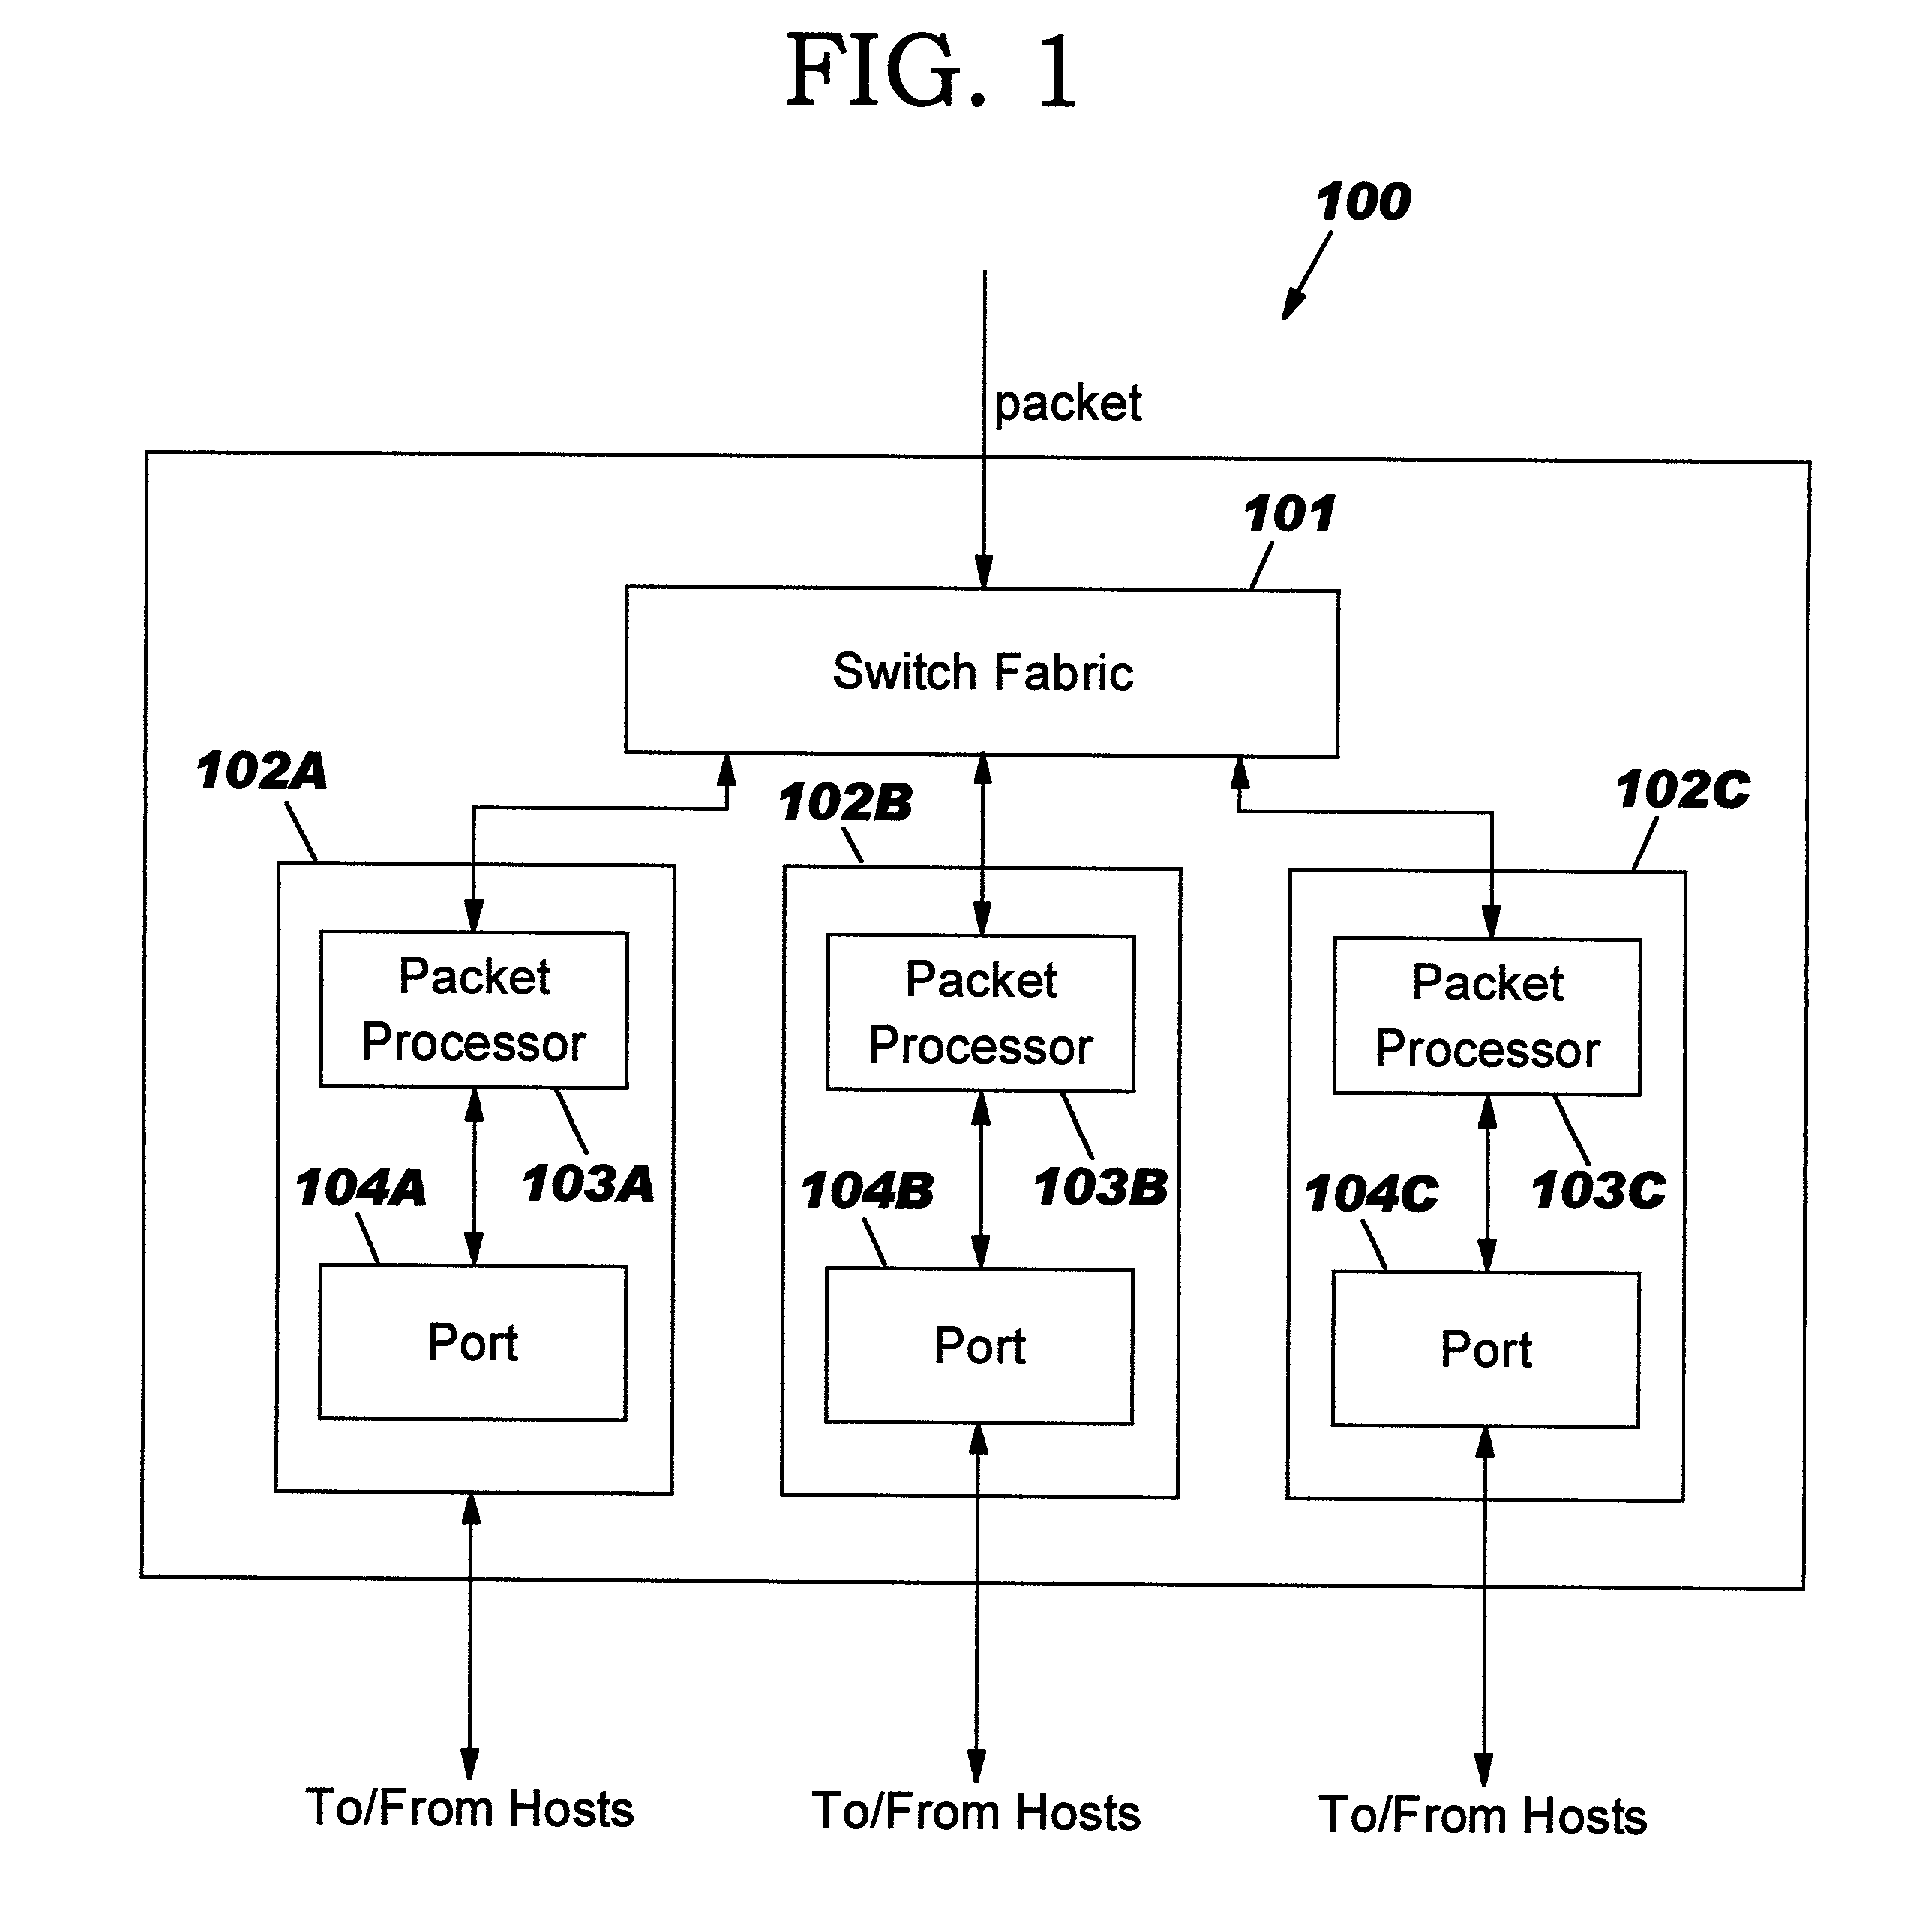 Priority based bandwidth allocation within real-time and non-real-time traffic streams